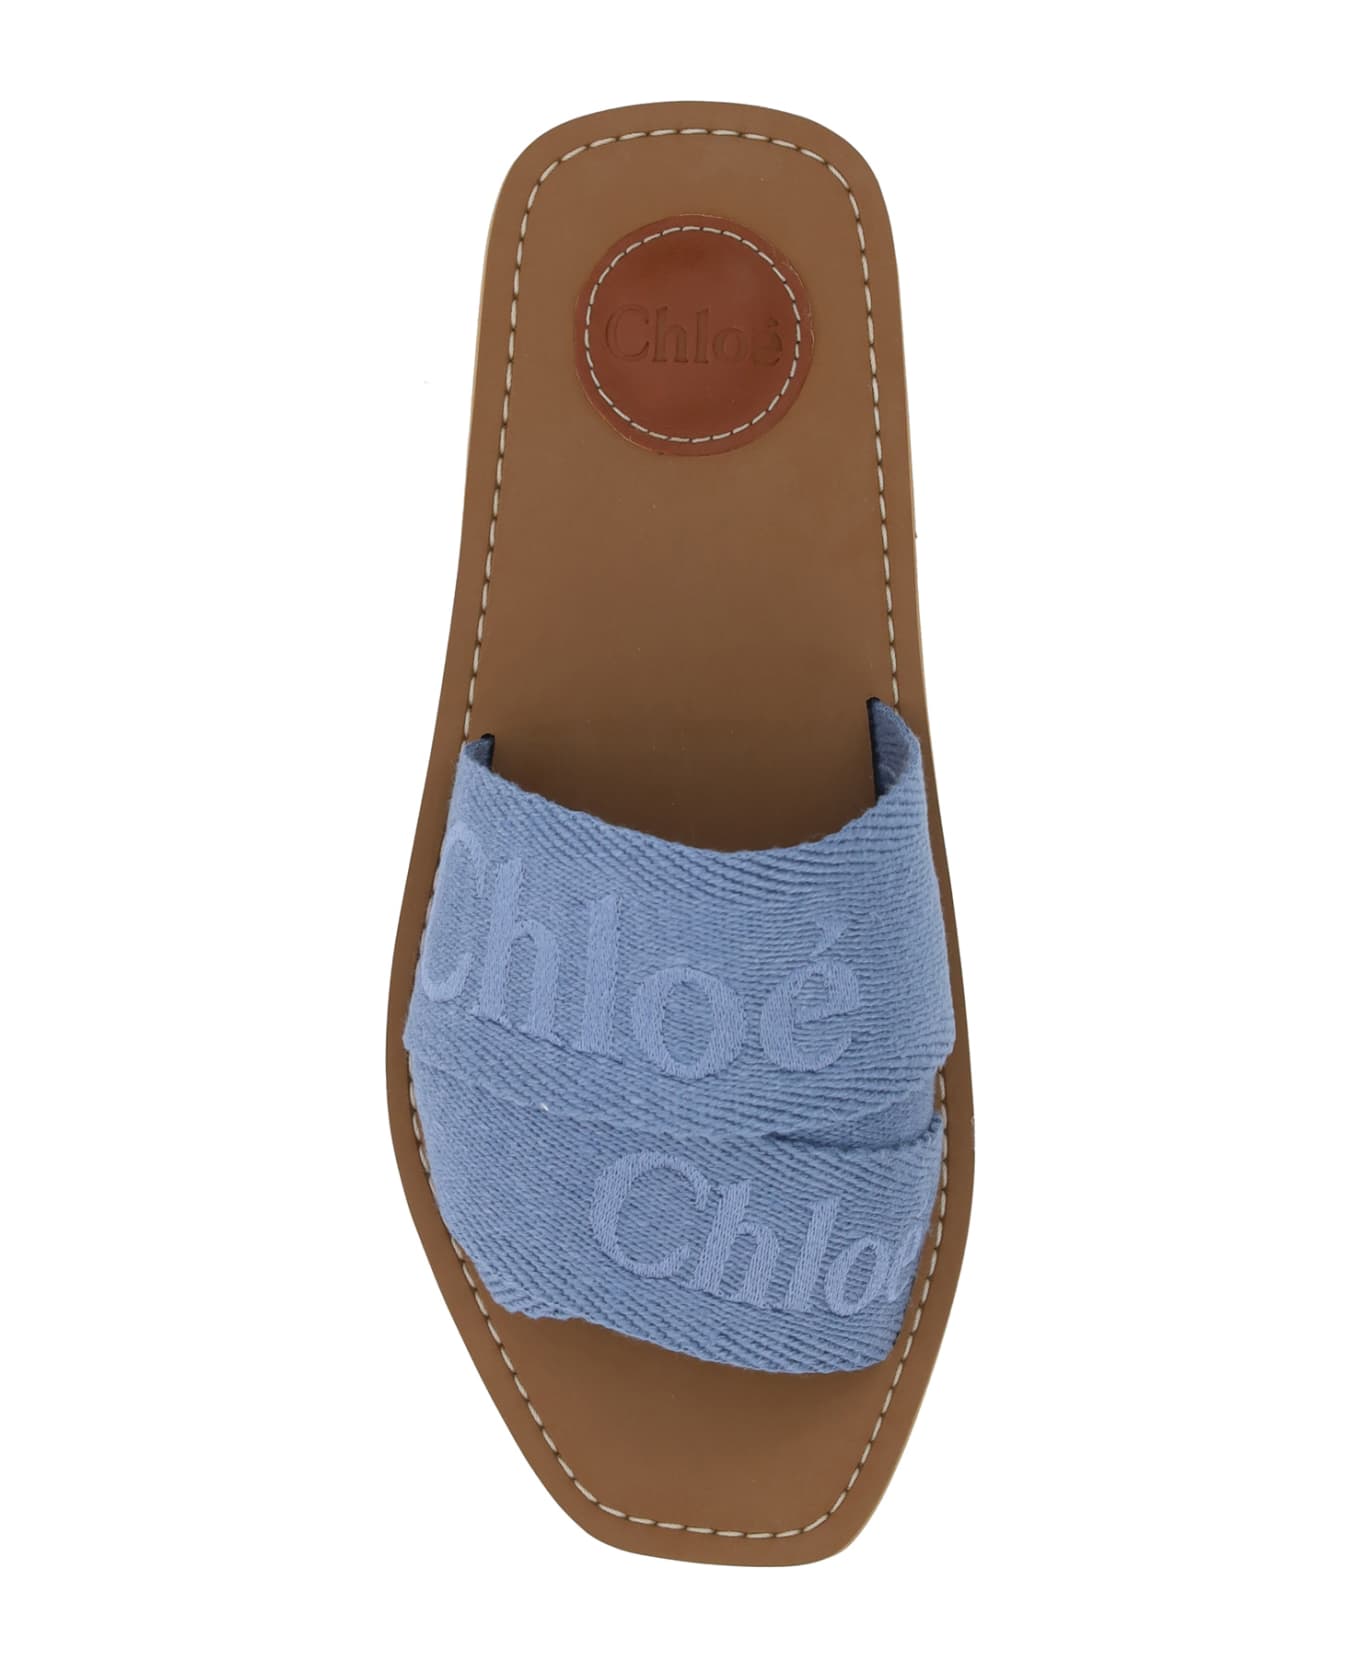 Chloé Woody Sandals - Washed Blue